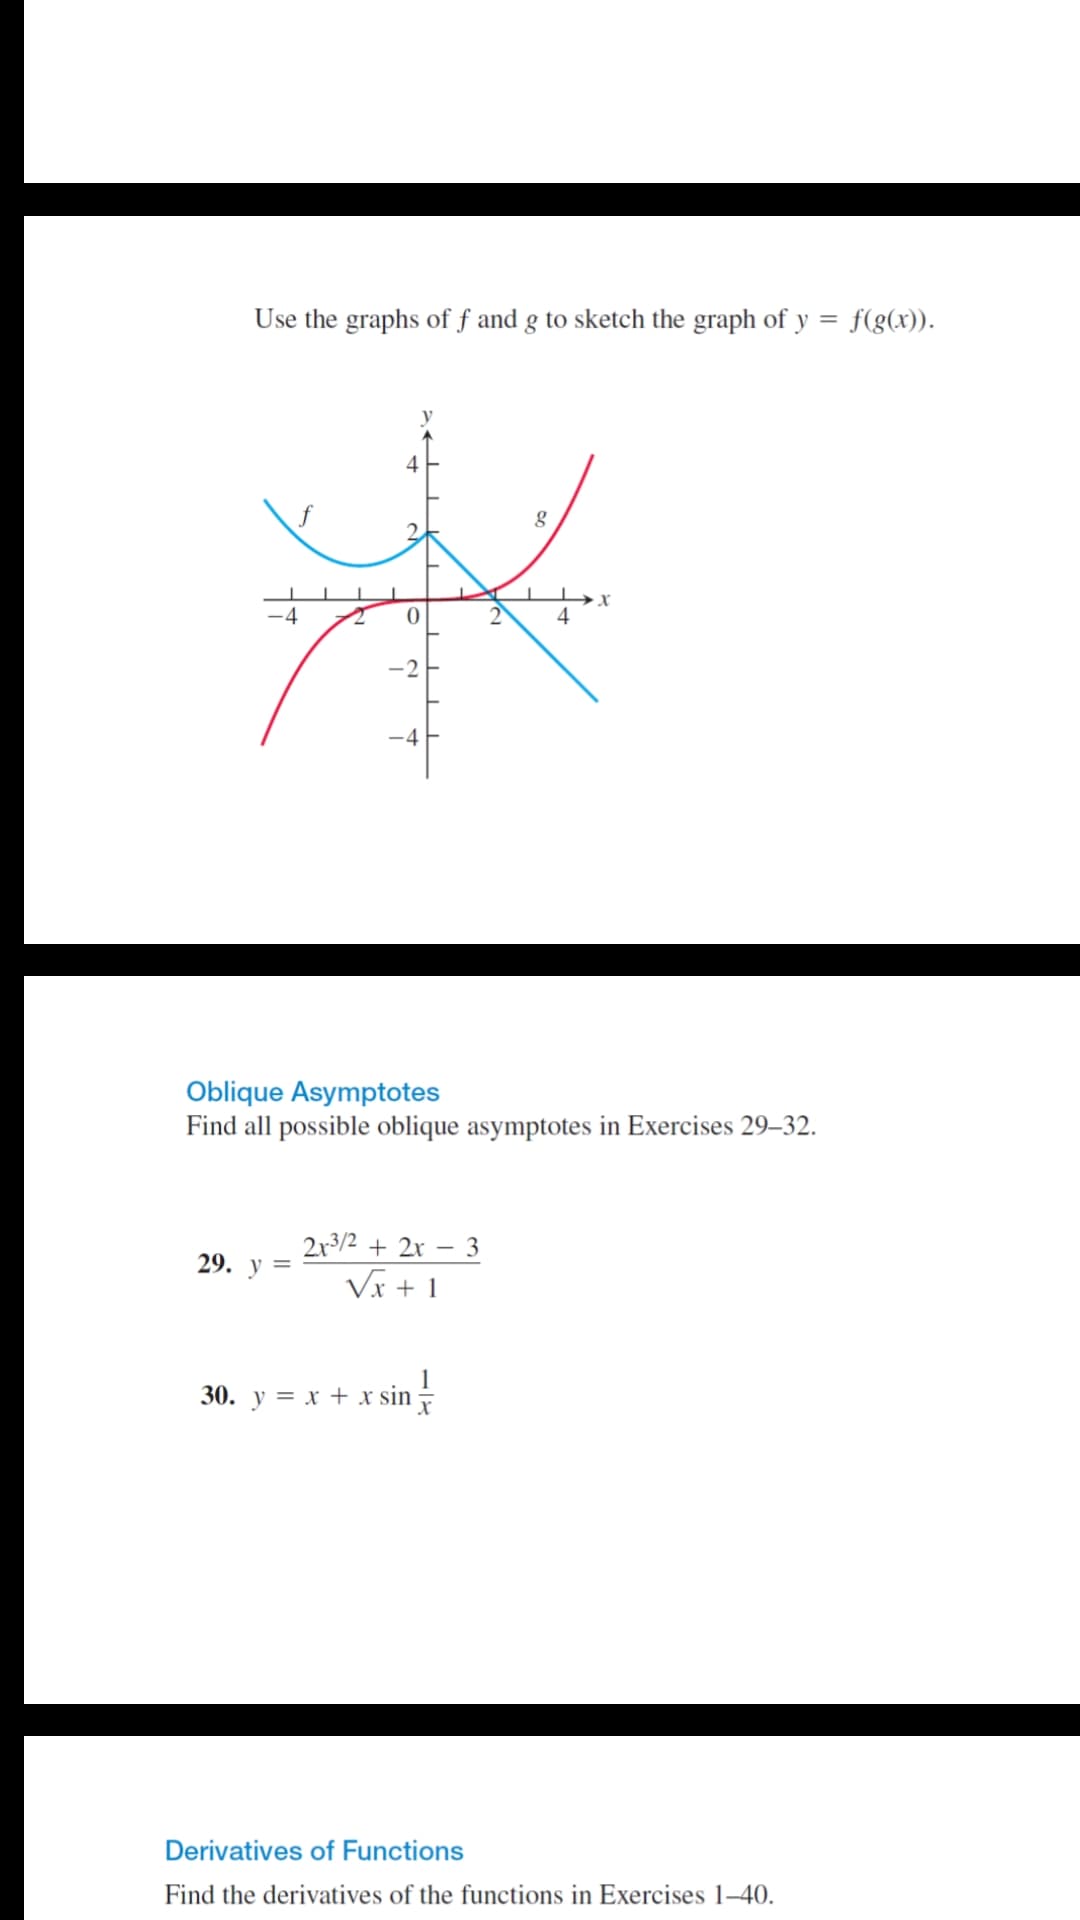 Use the graphs of f and g to sketch the graph of y = f(g(x)).
4
4
4
-2
-4
Oblique Asymptotes
Find all possible oblique asymptotes in Exercises 29–32.
2r3/2 + 2x – 3
29. у
Vx + 1
30. y = x + xr sin
Derivatives of Functions
Find the derivatives of the functions in Exercises 1–40.
